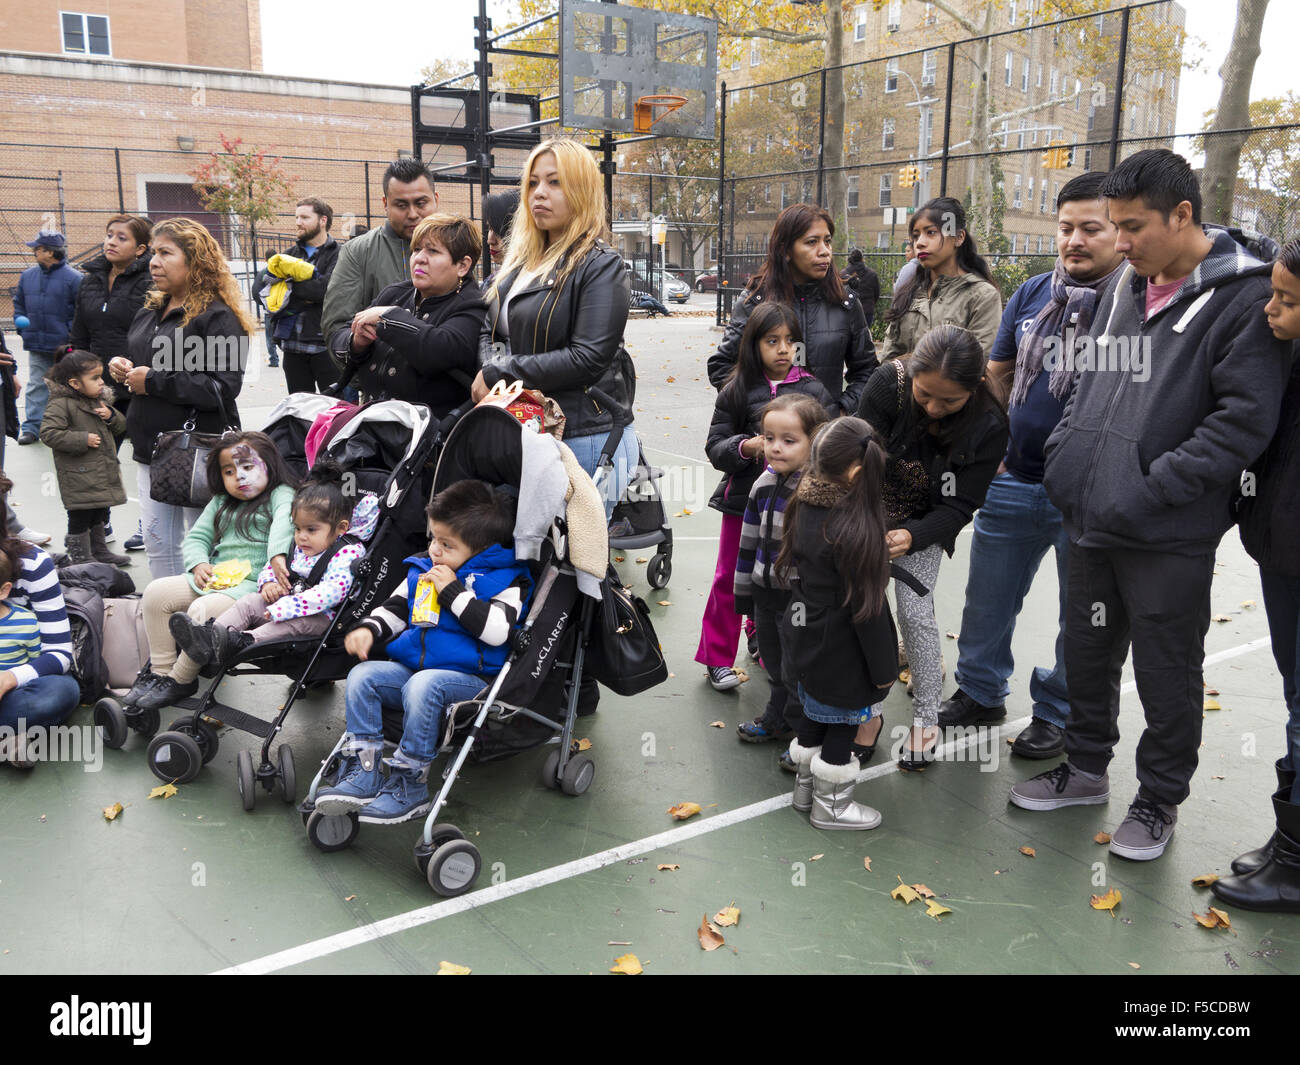 Families watch performance at Day of the Dead Festival in the Kensington section of Brooklyn, NY, Nov.1, 2015. Stock Photo